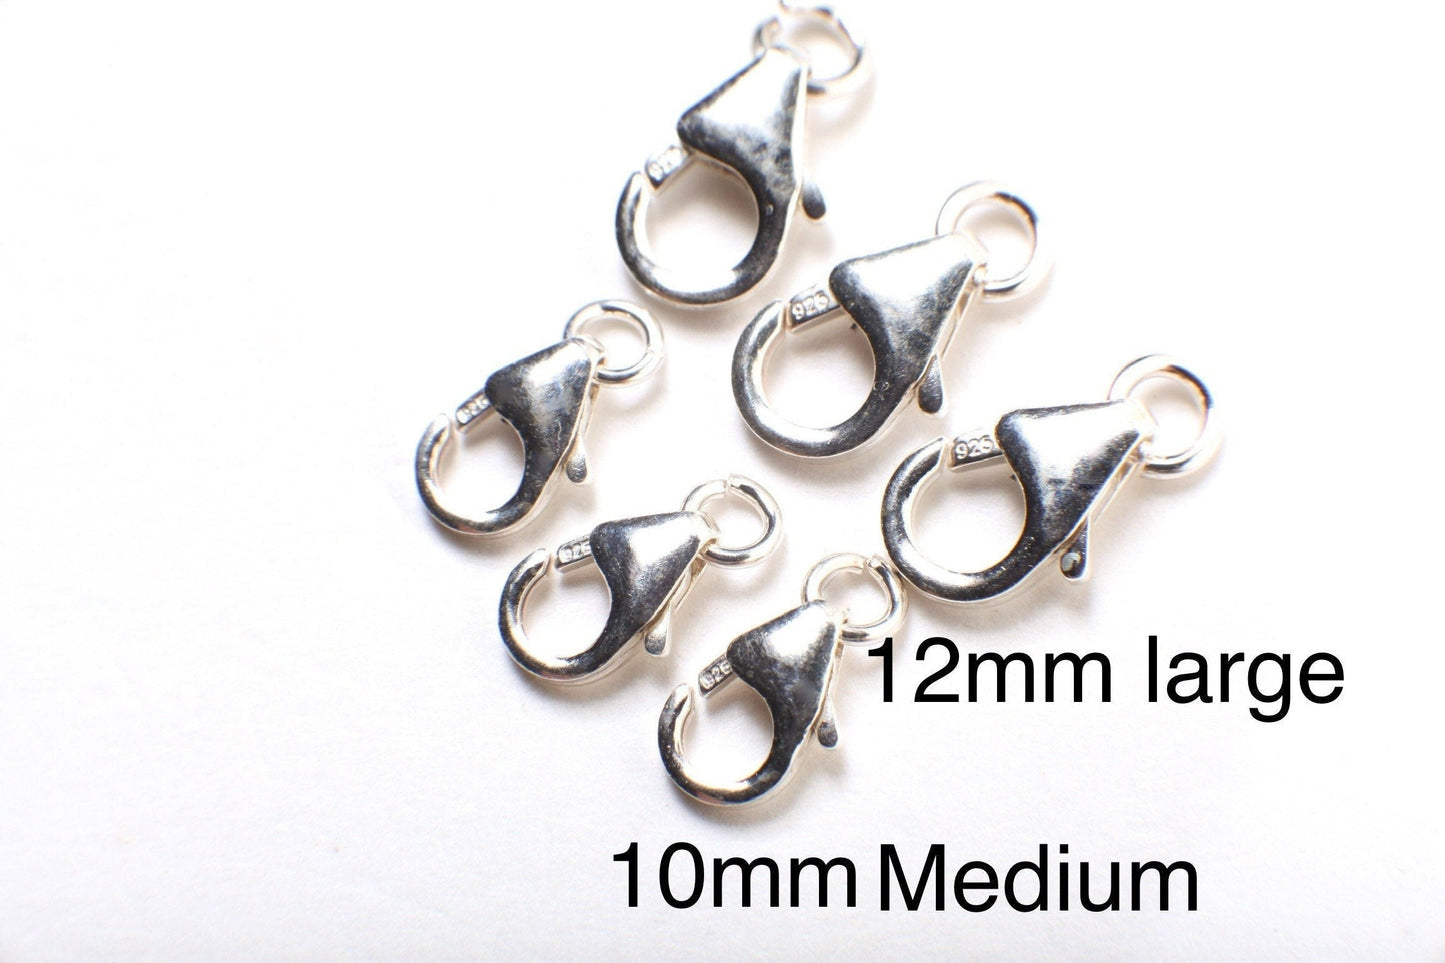 Trigger Lobster Clasp 8mm,10mm,12mm with Jump Ring, 925 Sterling Silver, DIY Jewelry Making Italian Findings, Beading Supplies, 5/10 Pieces